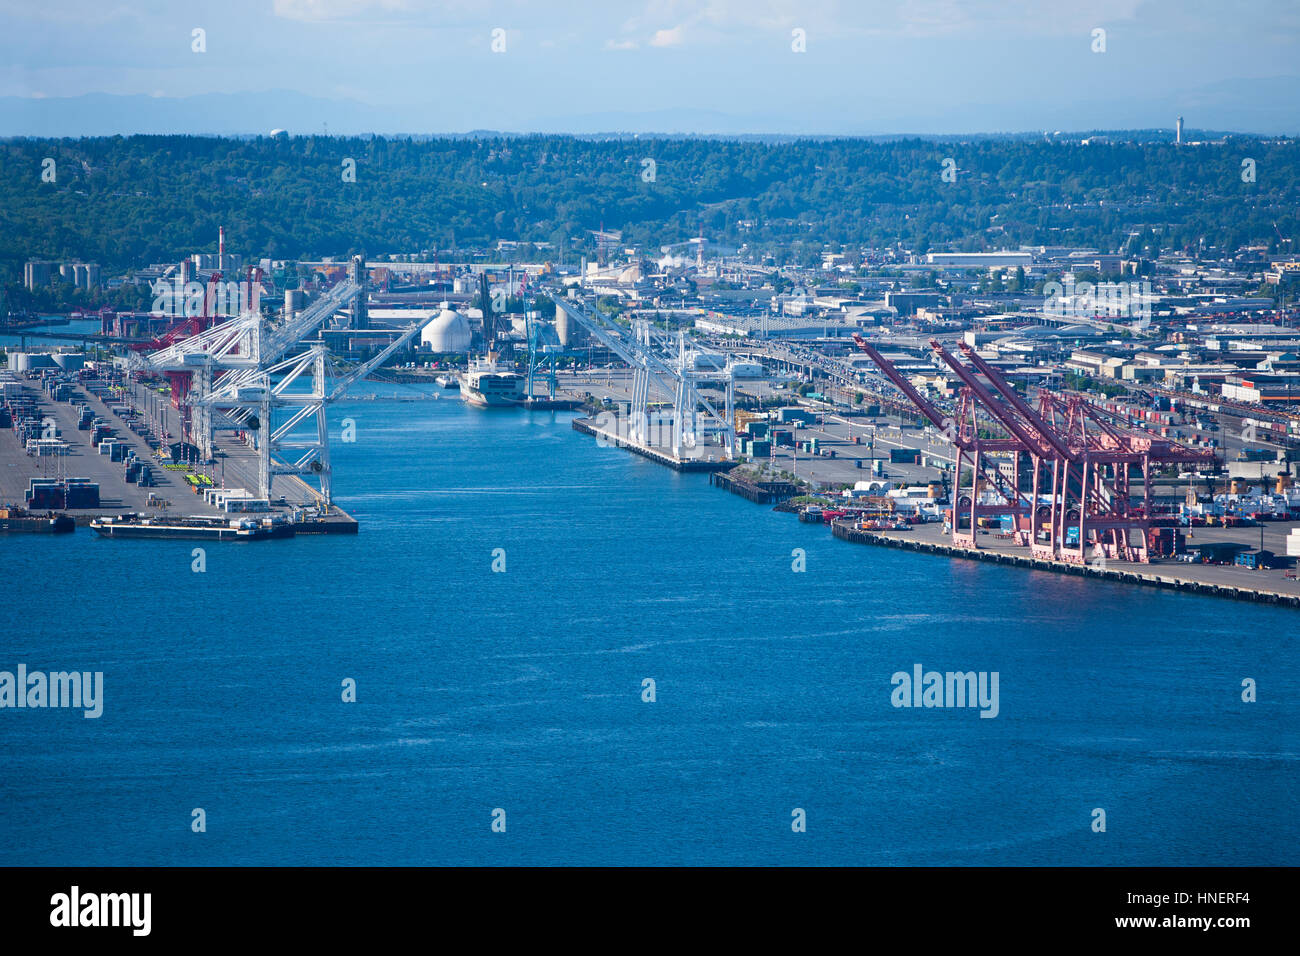 View from Space Needle to dock area, Seattle Stock Photo